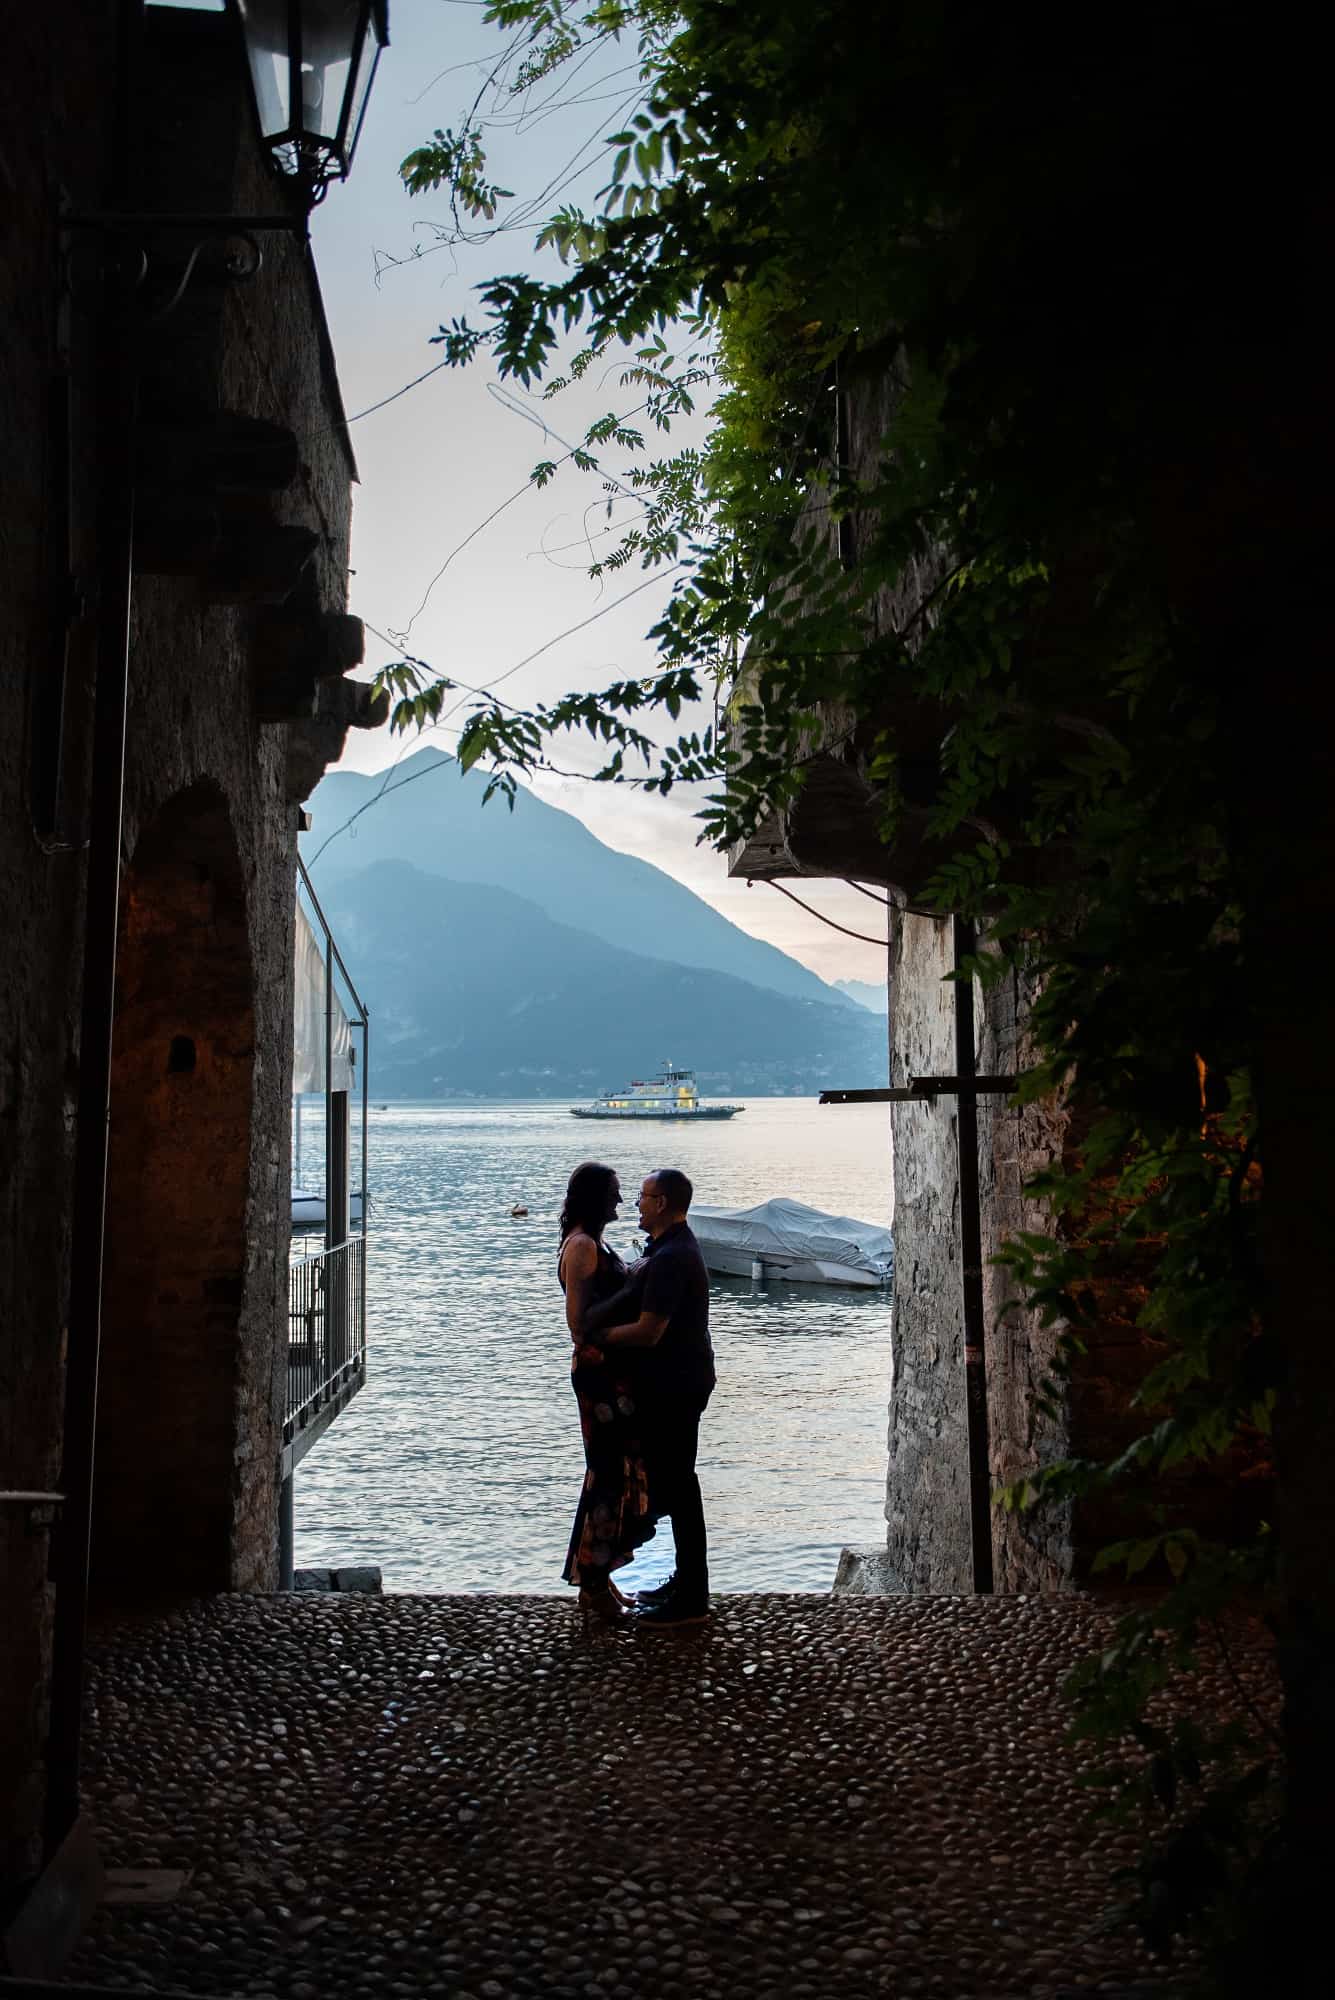 overlooking the lake through an alleyway with the bride and groom silhouetted